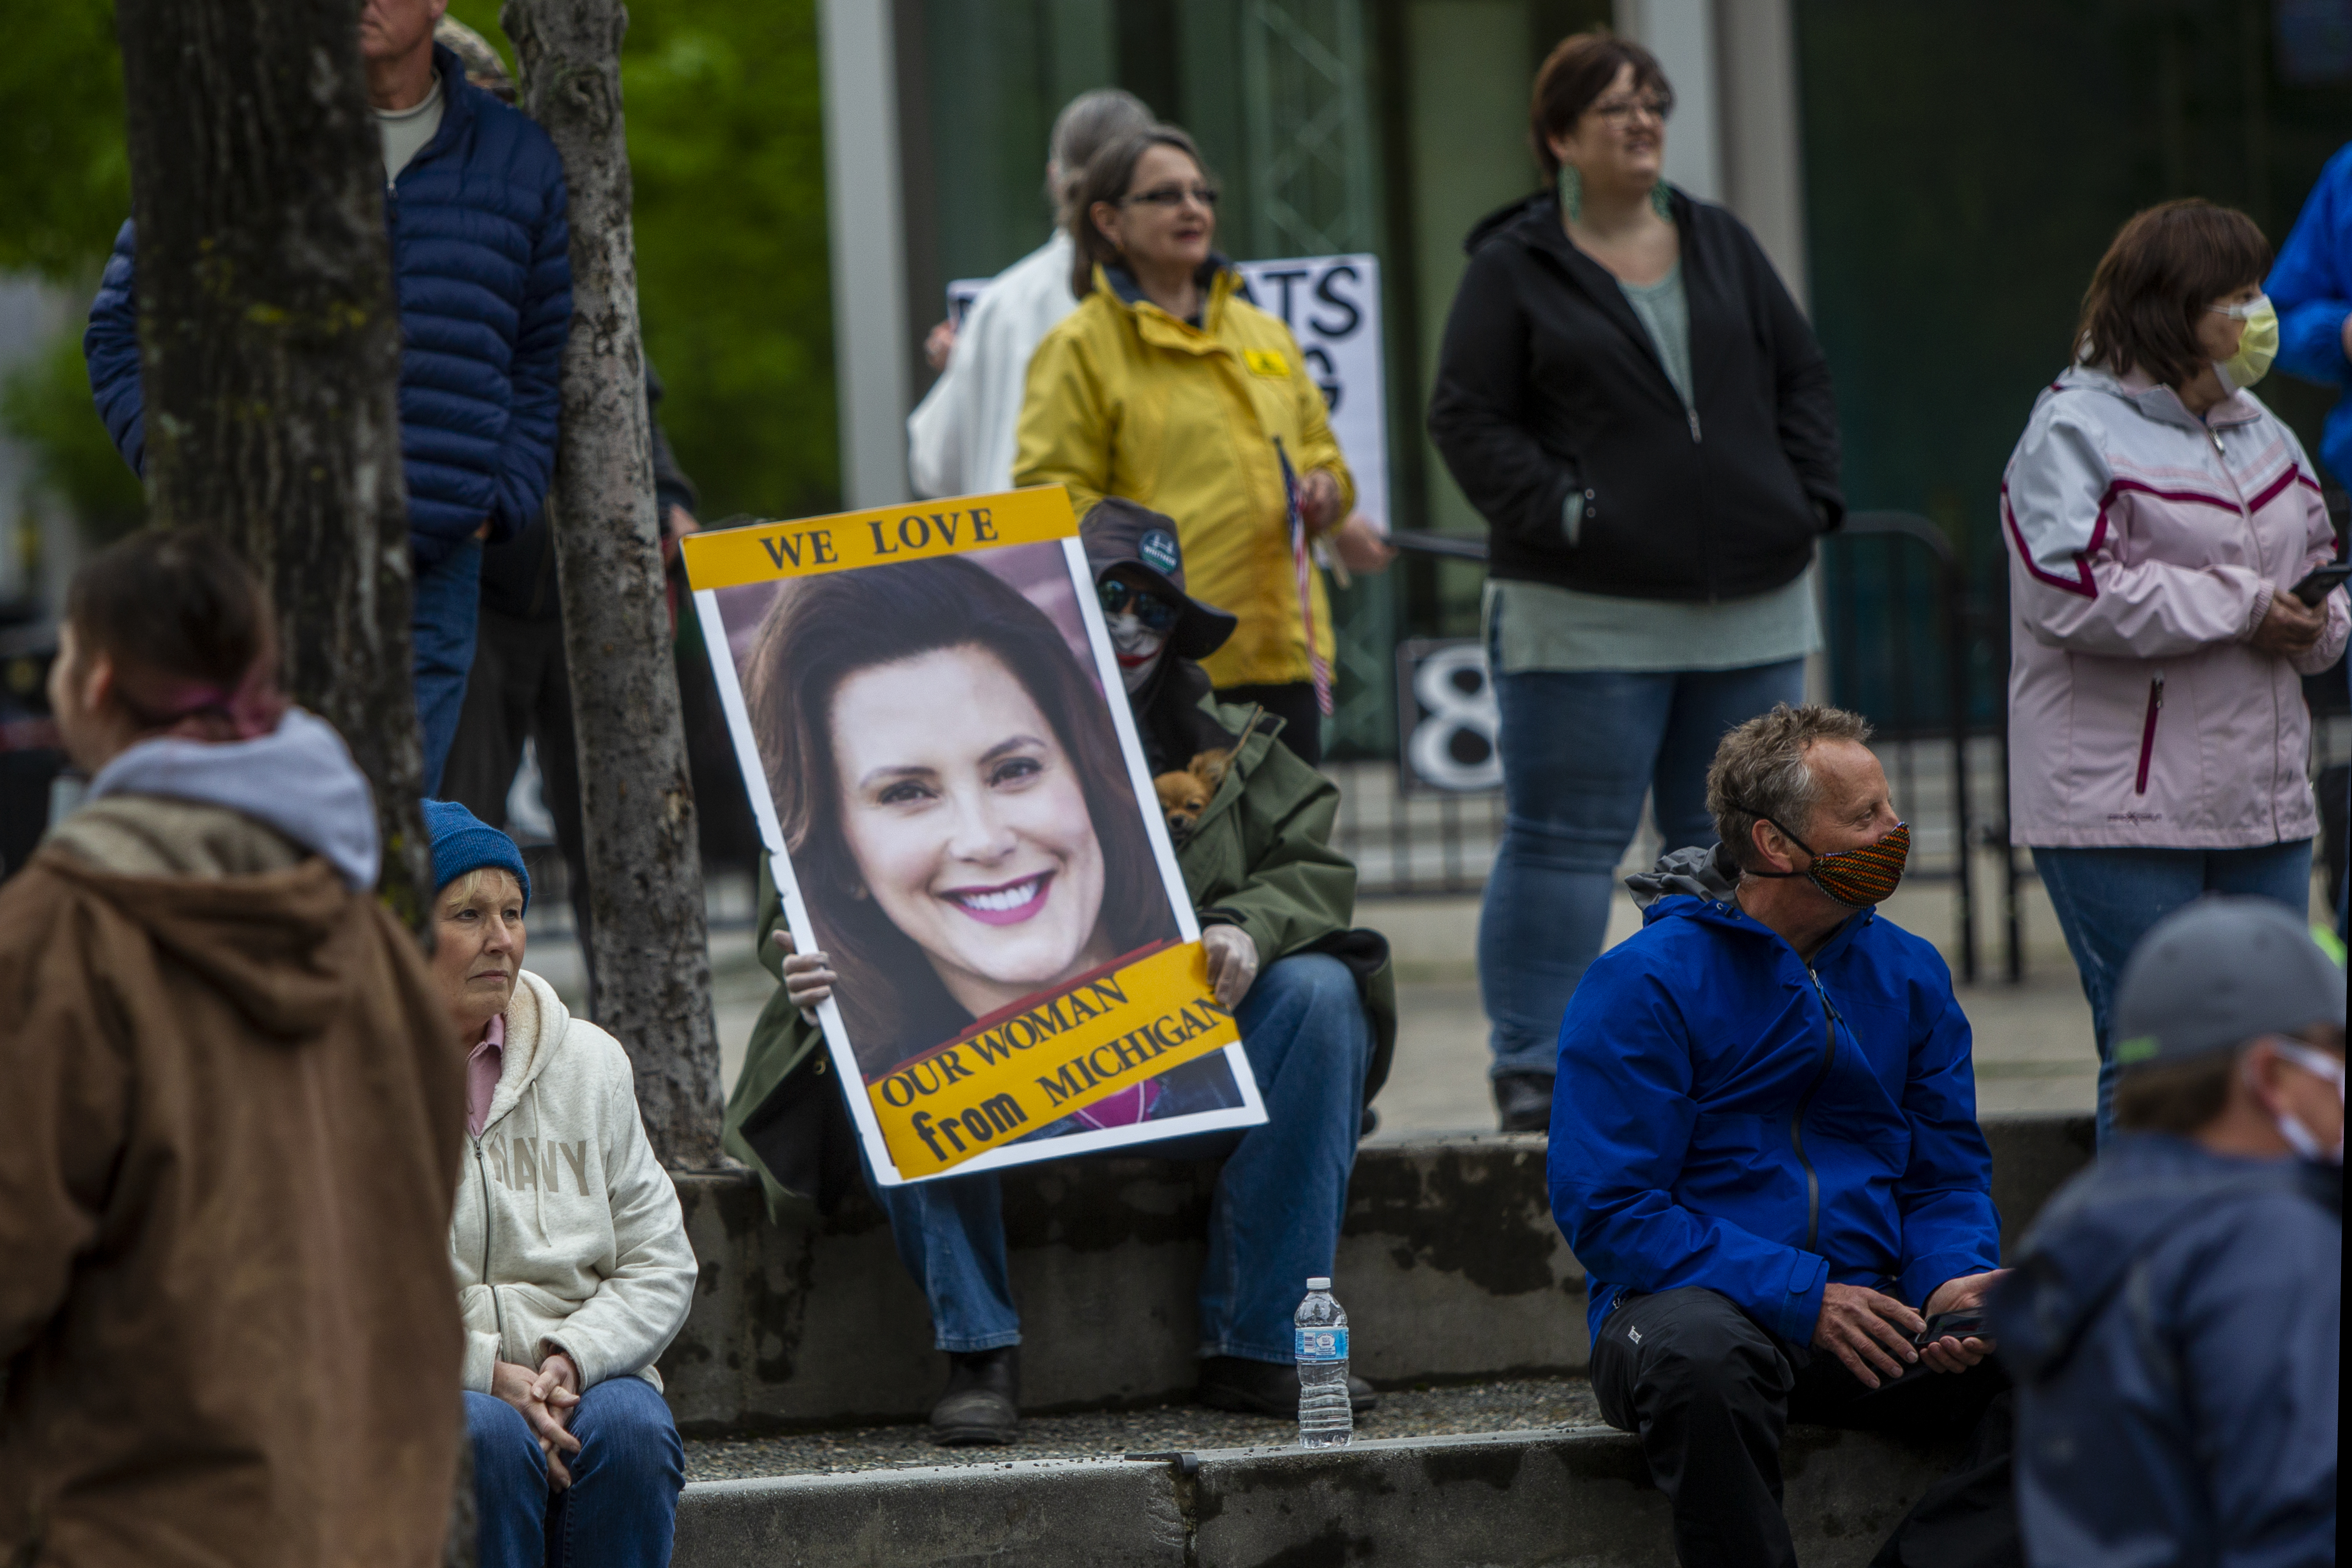 A counter-protester watches the "American Patriot Rally-Sheriffs speak out" event at Rosa Parks Circle in downtown Grand Rapids on Monday, May 18, 2020. The crowd is protesting against Gov. Gretchen Whitmer's stay-at-home order. (Cory Morse | MLive.com)